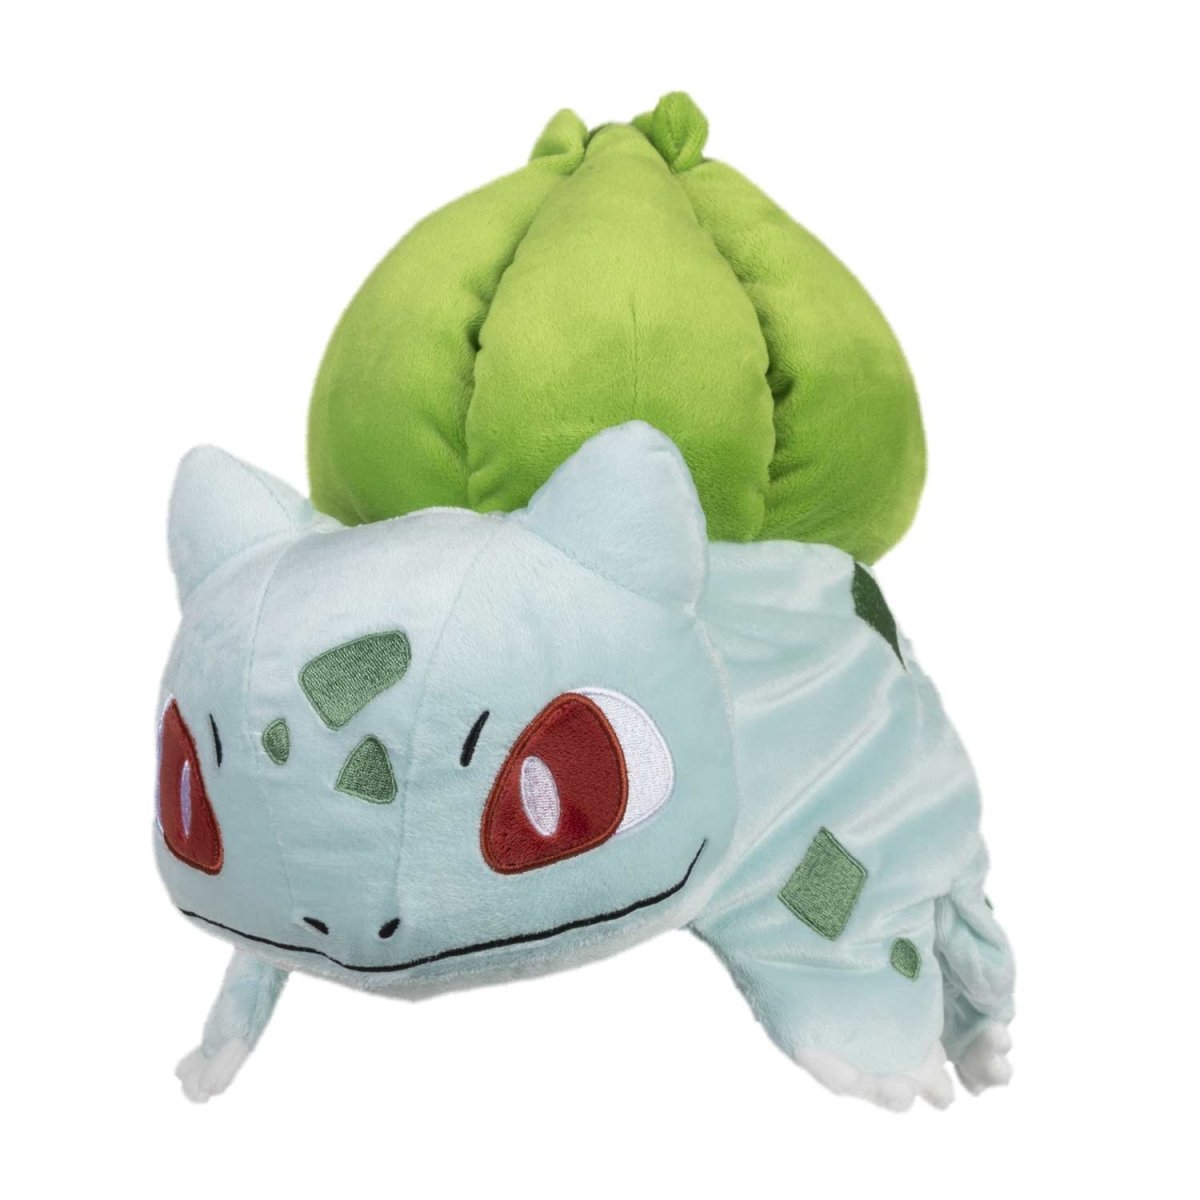 Shiny Bulbasaur Party hat - TRADE - Registered Shiny Bulbasaur require